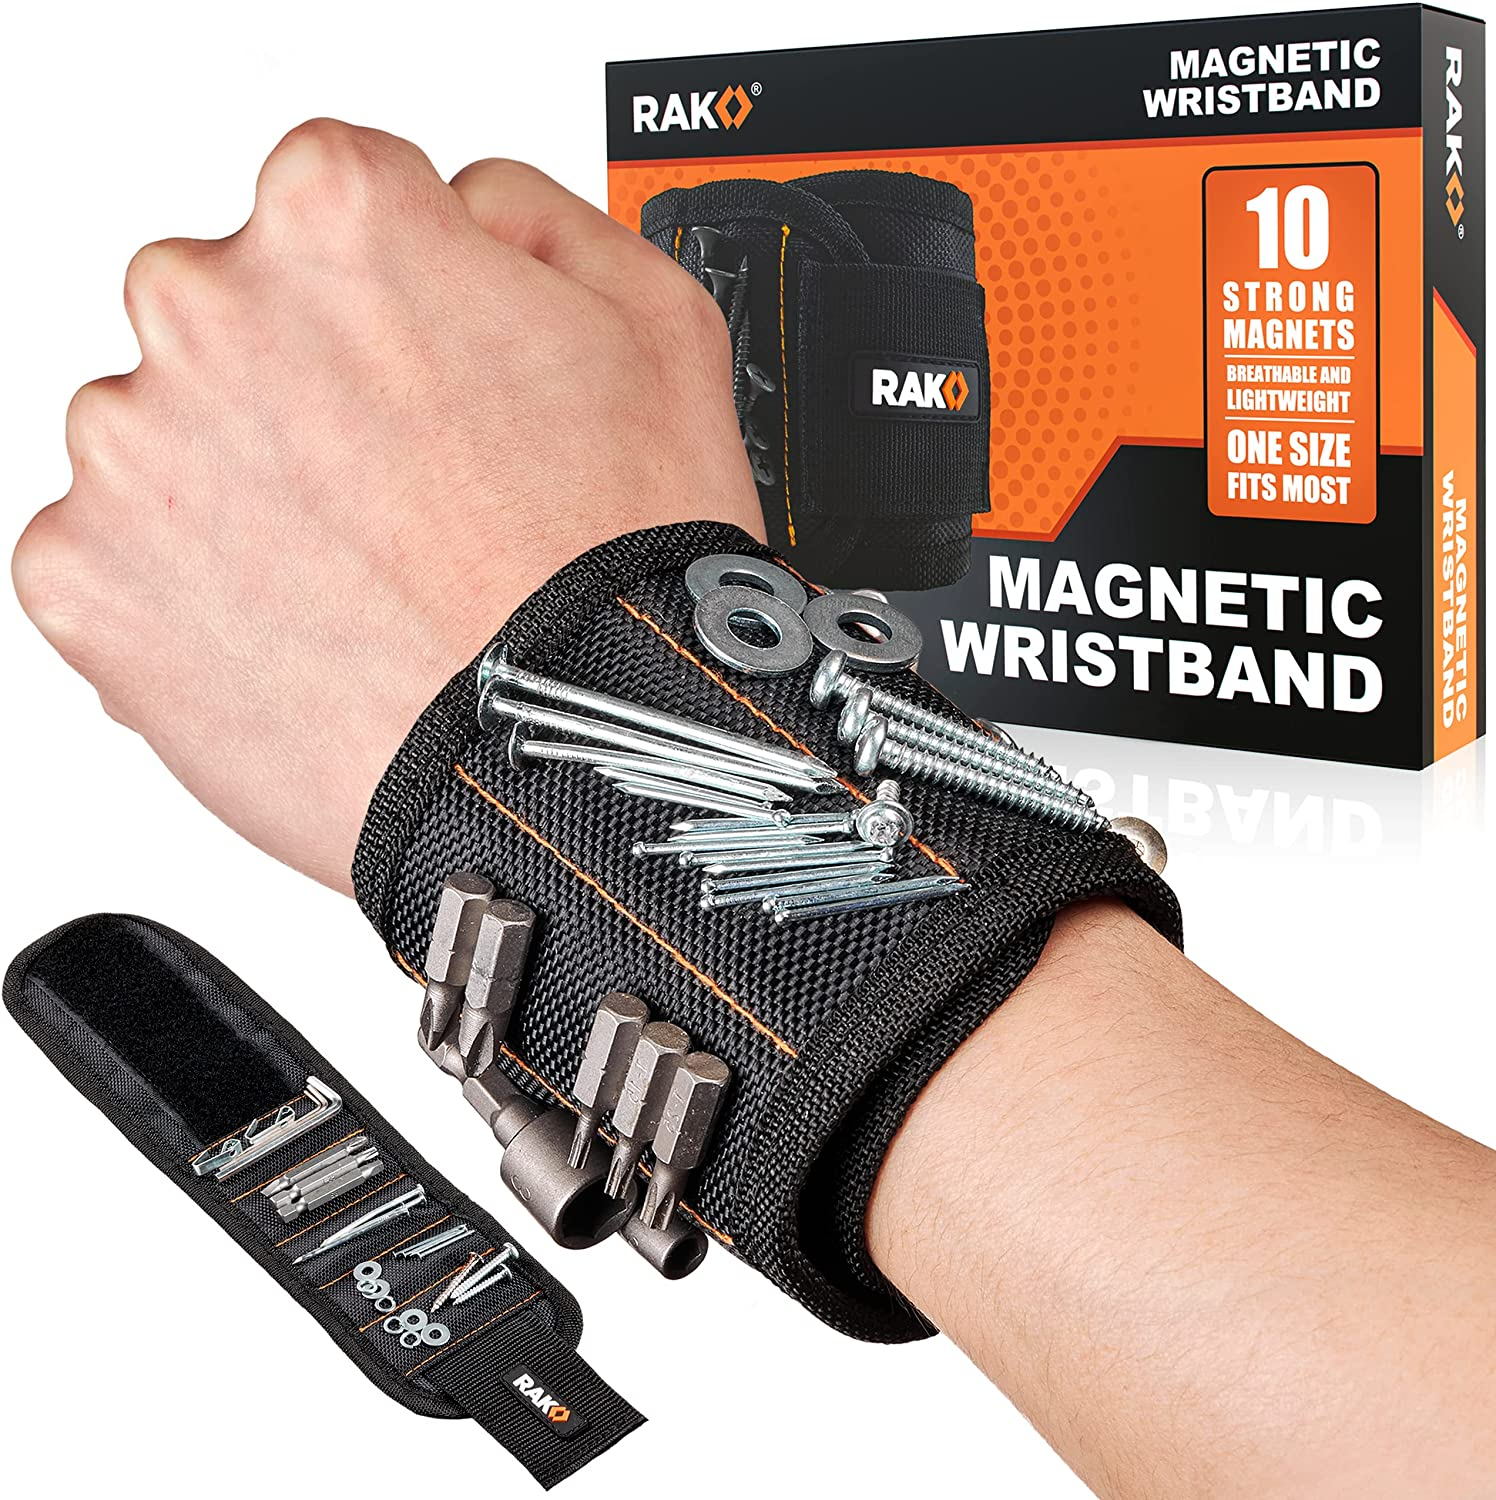 A wrist with a black magnetic wristband holding screws, nails, and washers with another wristband and its box in the background.